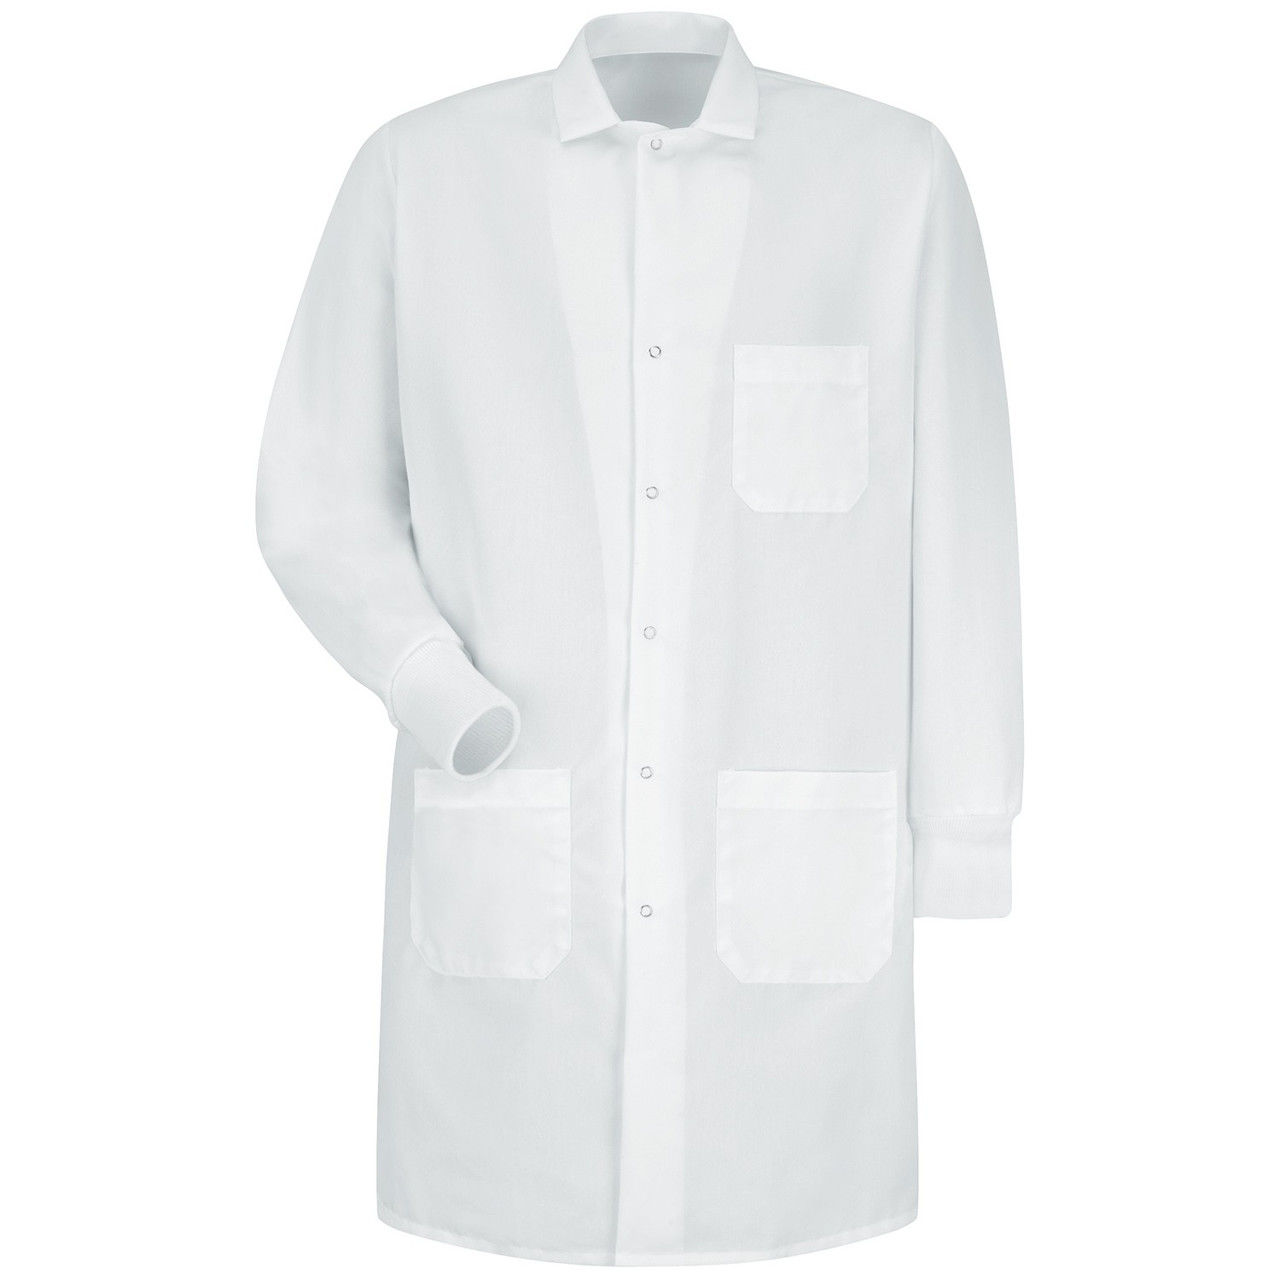 Is the fabric of the lab coat with cuffed sleeves comfortable?